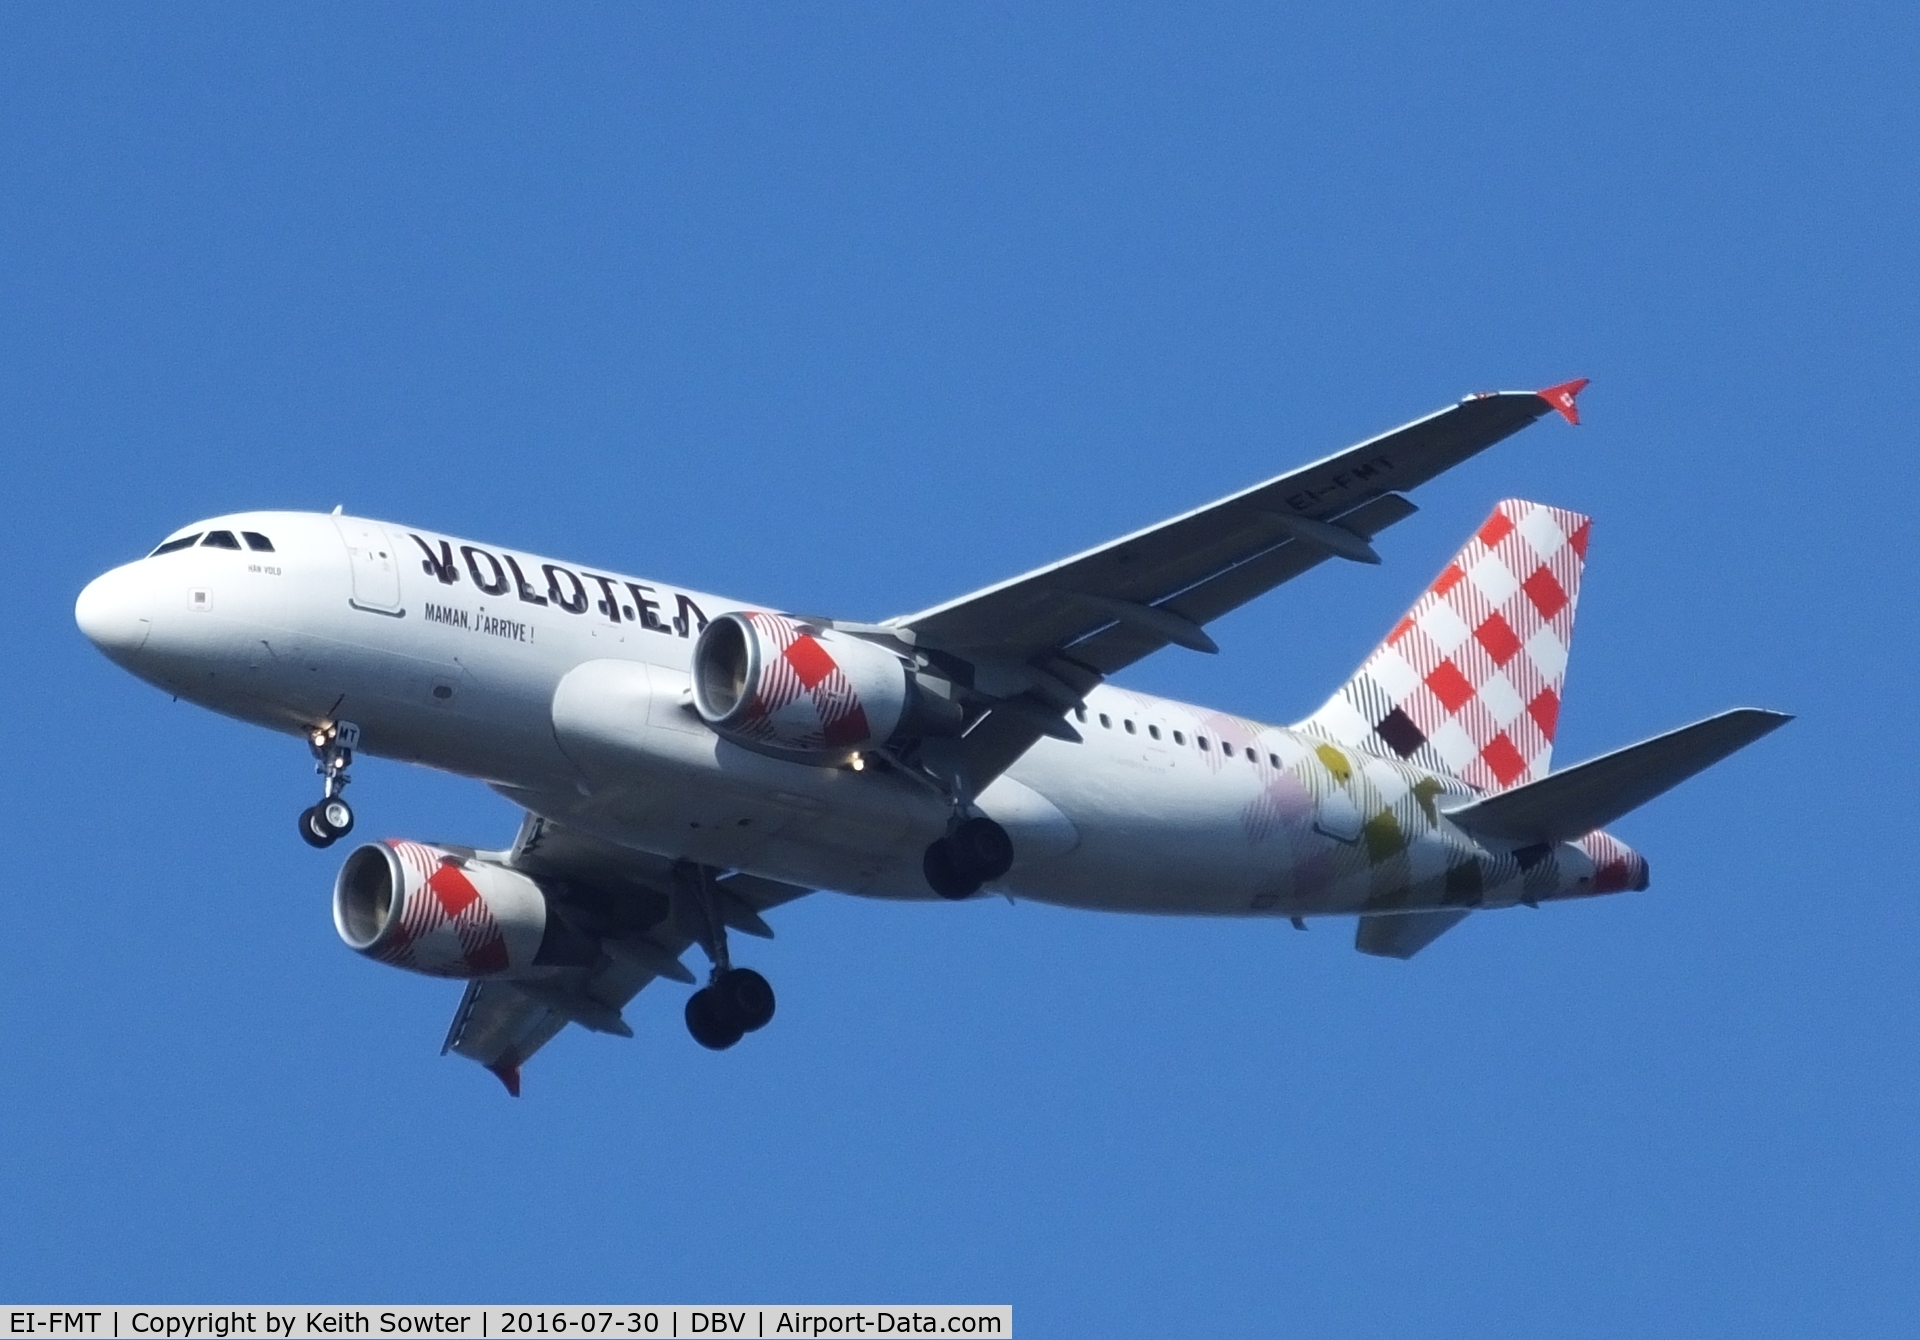 EI-FMT, 2003 Airbus A319-112 C/N 2113, Short finals to land at Dubrovnik